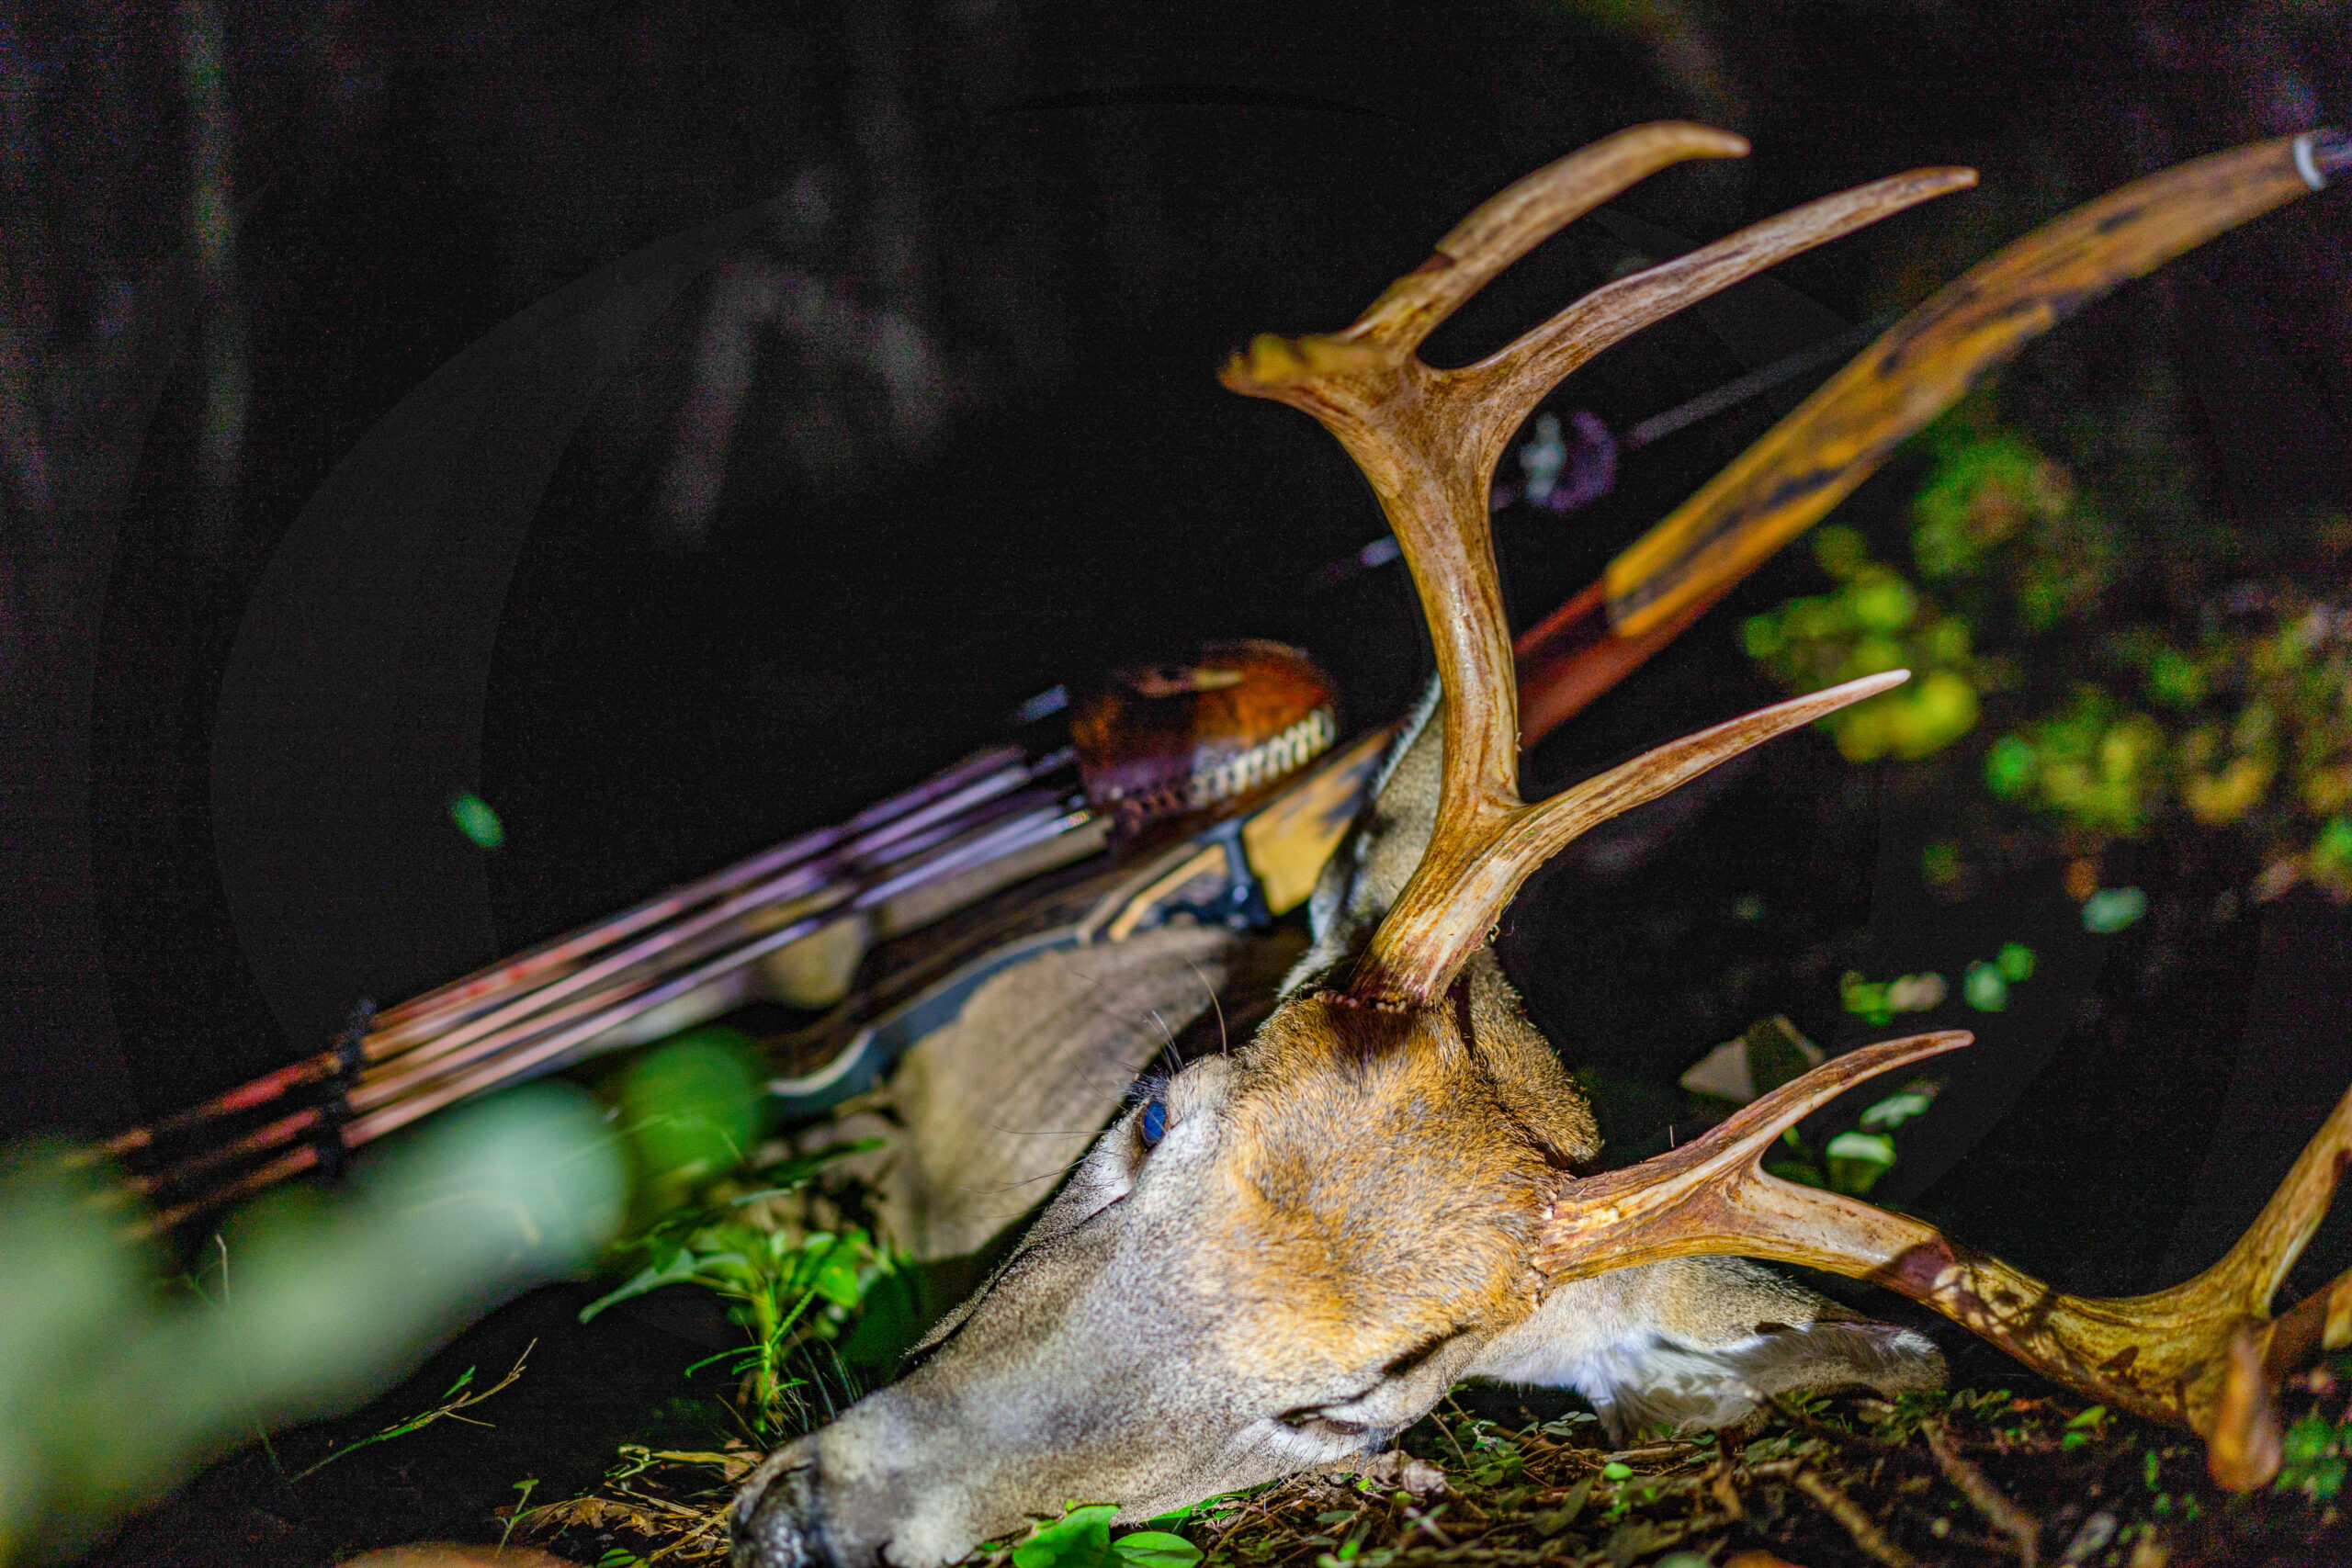 We tested the best deer hunting gear throughout the year.